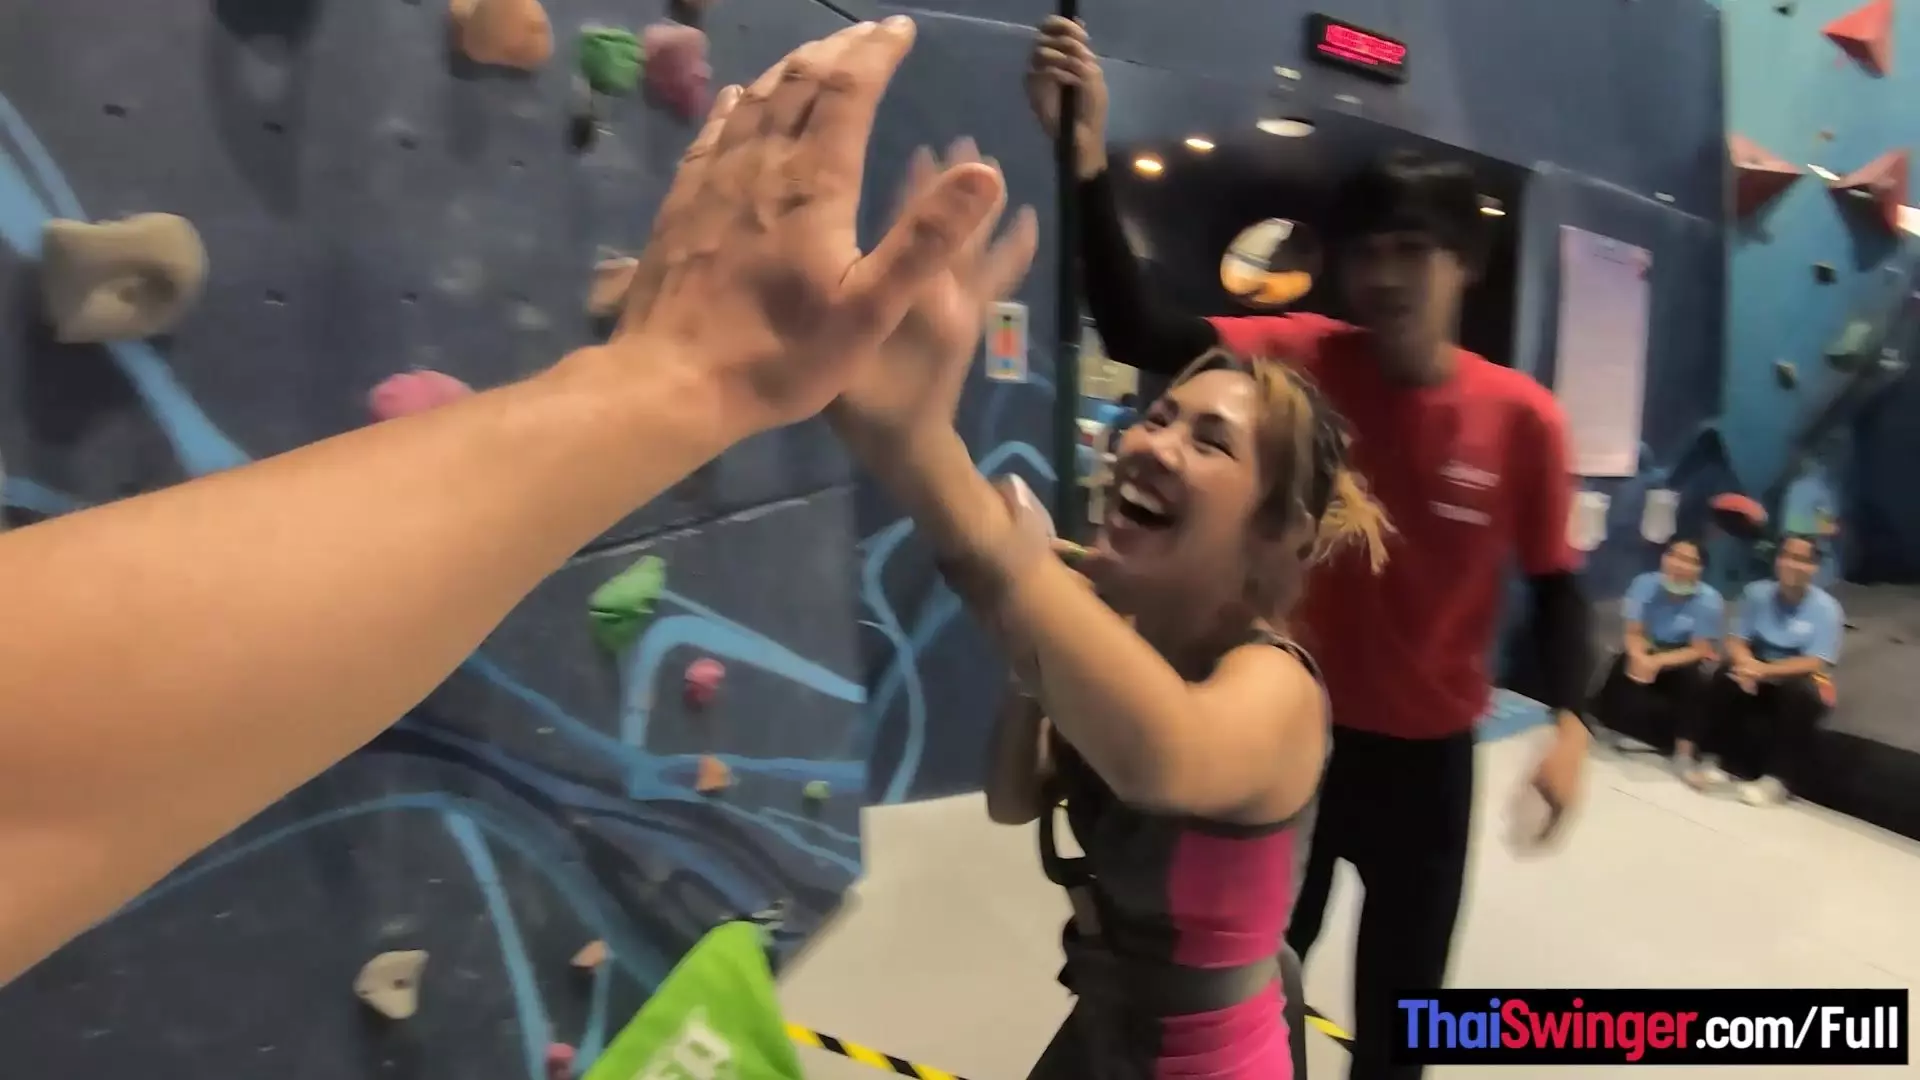 Thai climber girlfriend was not very good at it but she was better at